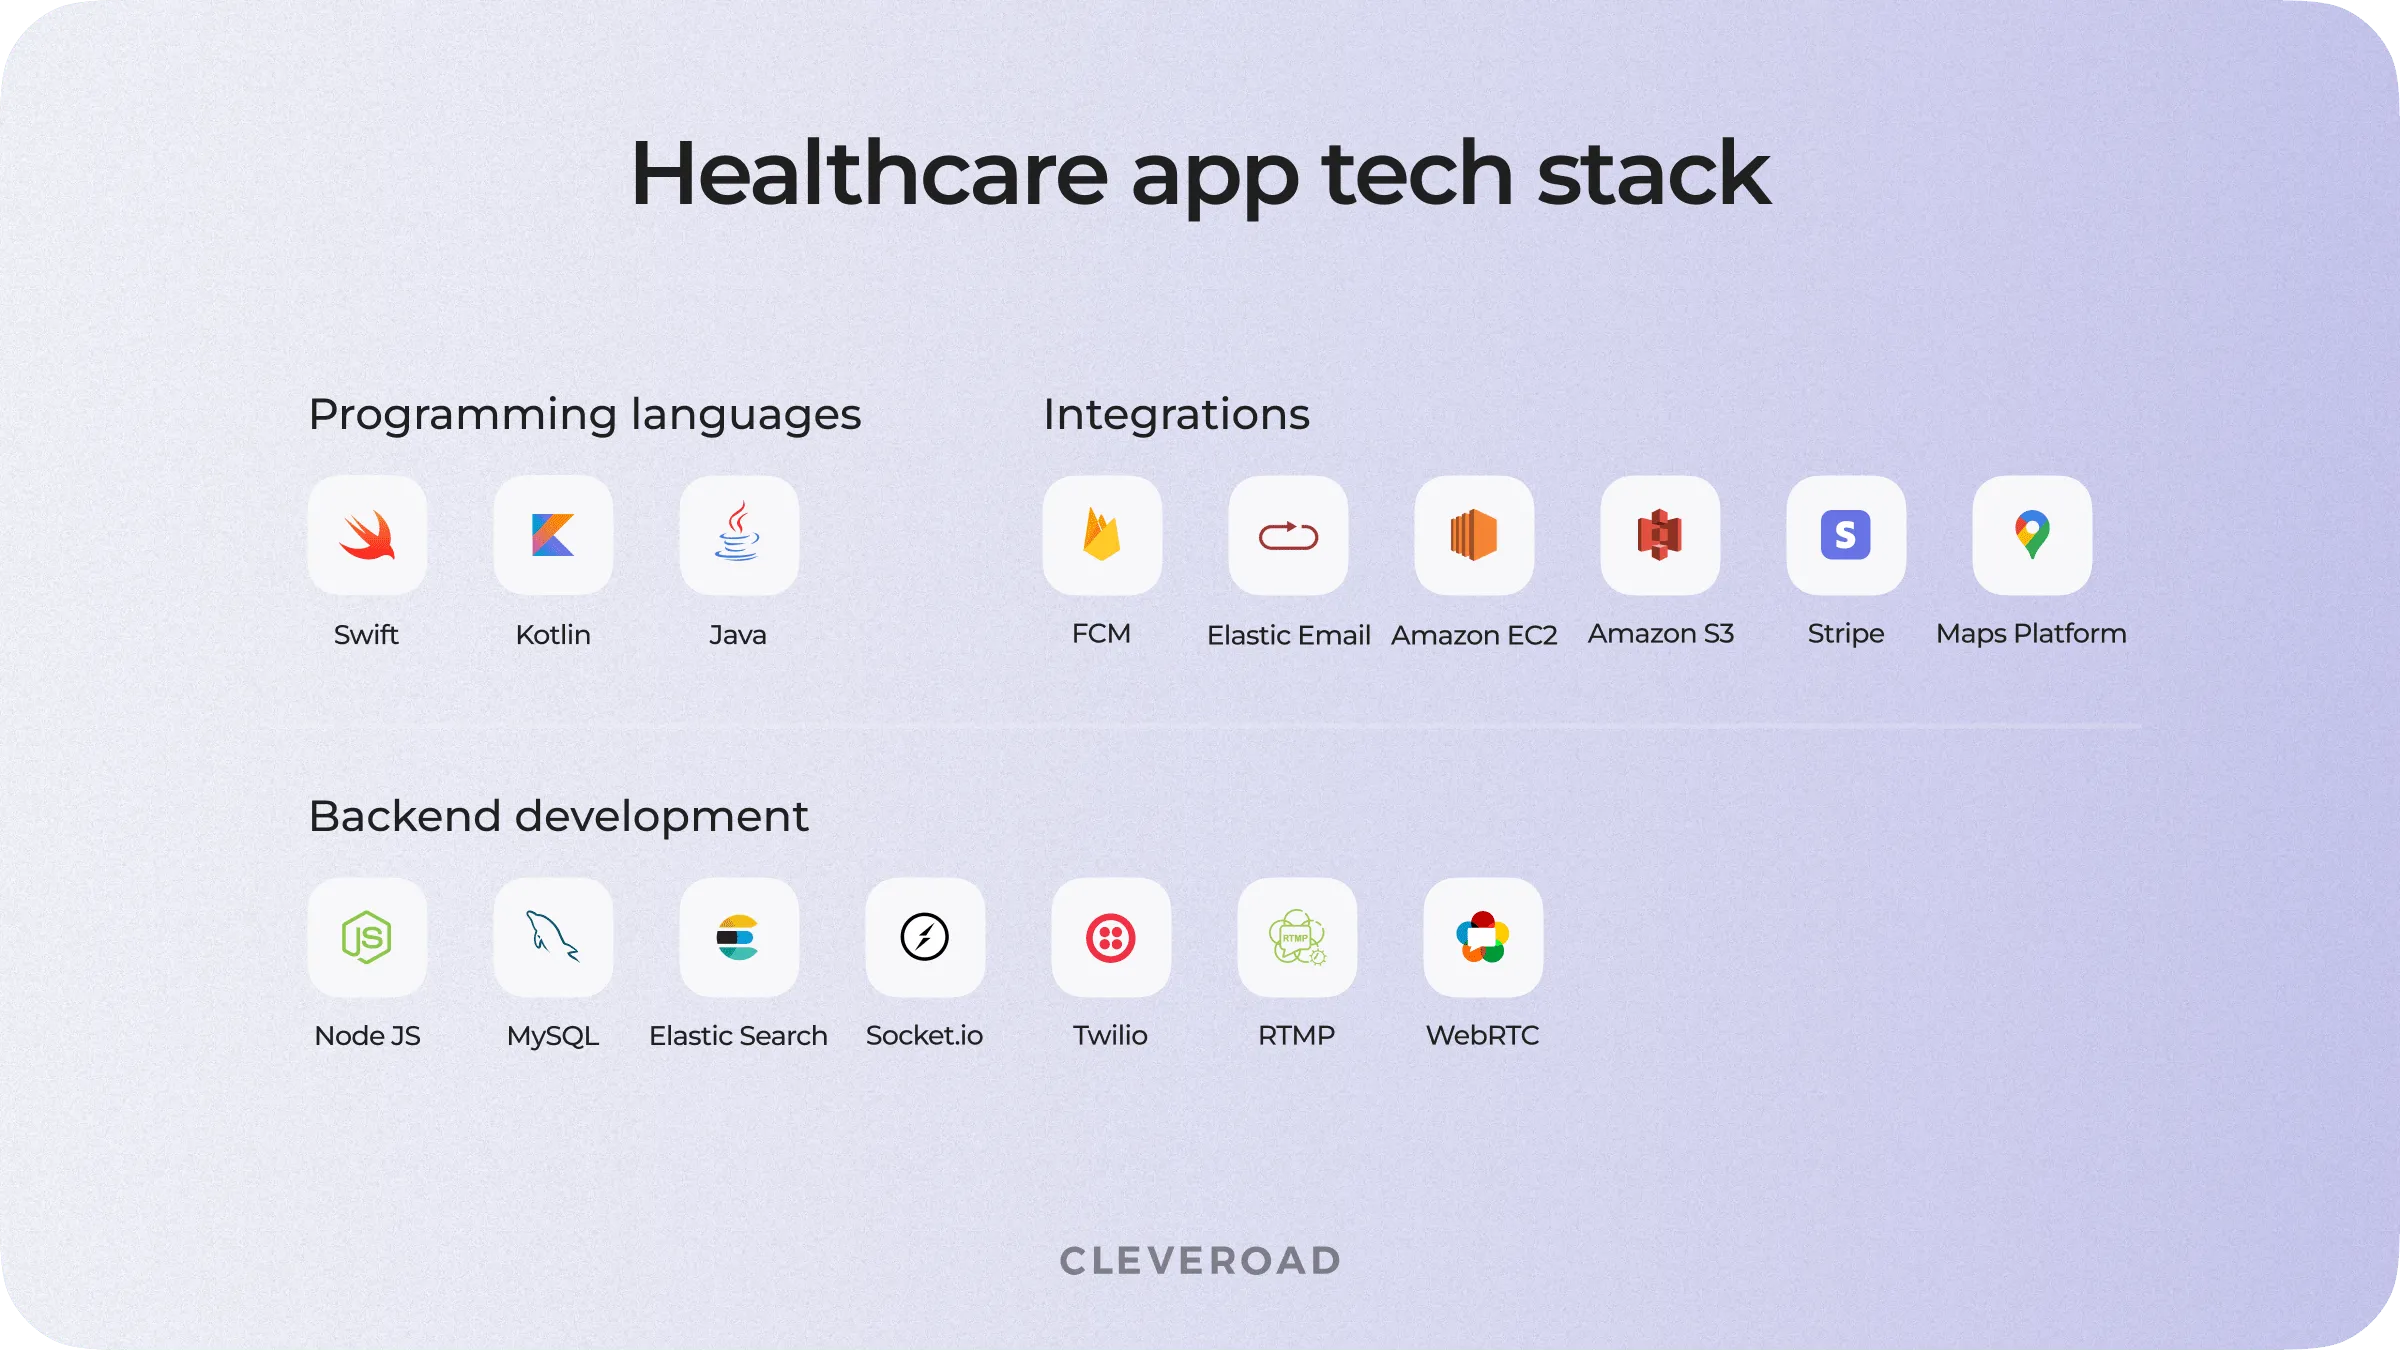 Common technologies for a healthcare app